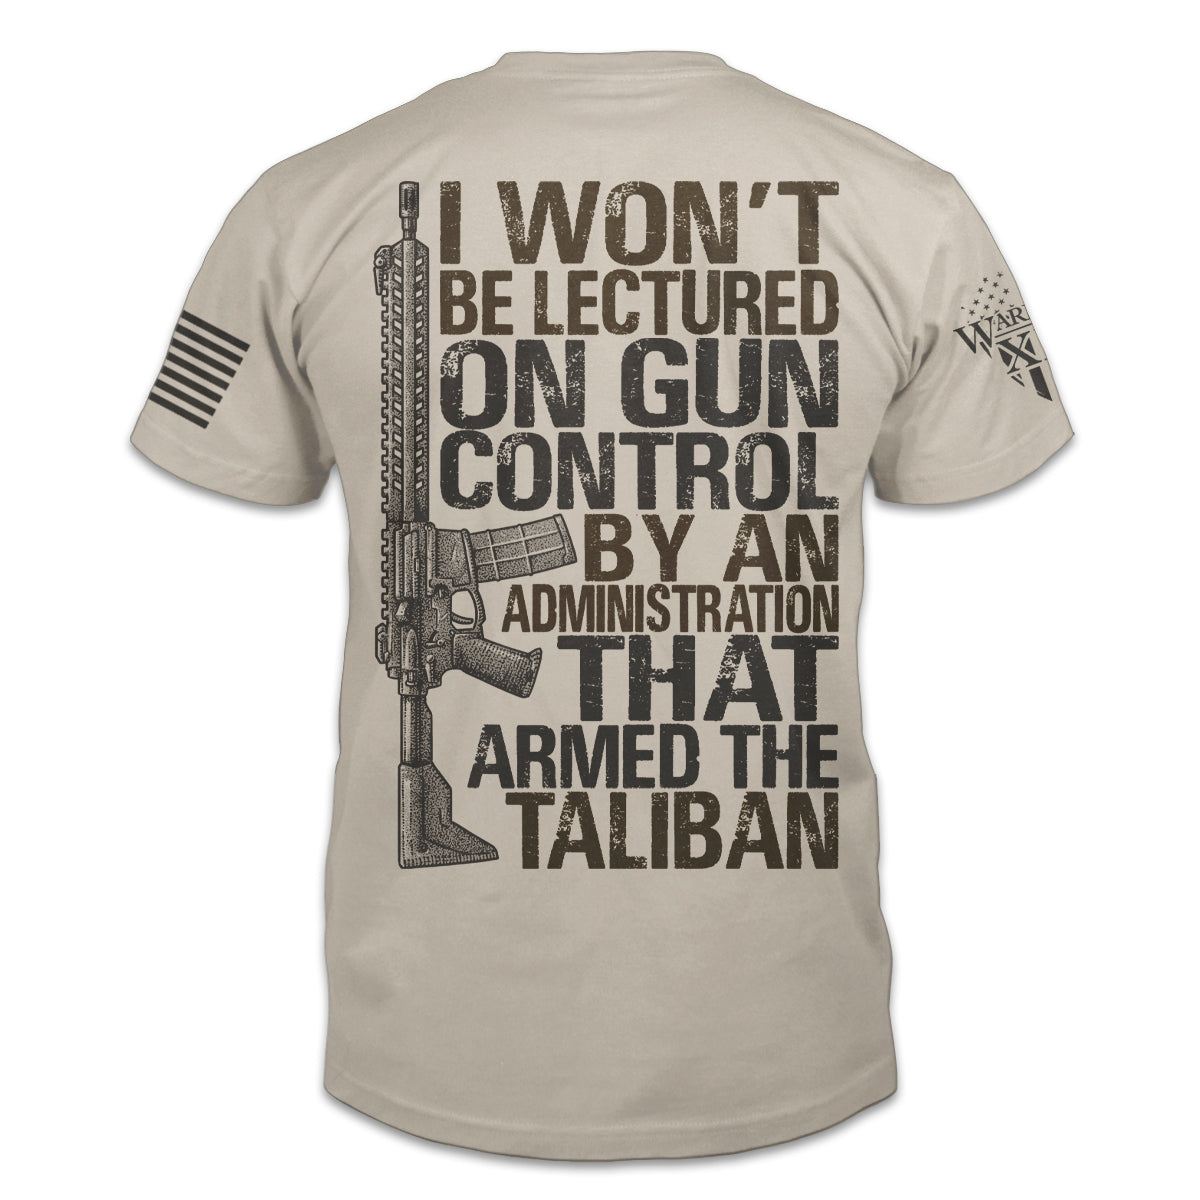 A light tan t-shirt with the words 'I won't be lectured on gun control by an administration that armed the Taliban" with an AR15 printed on the back of the shirt.